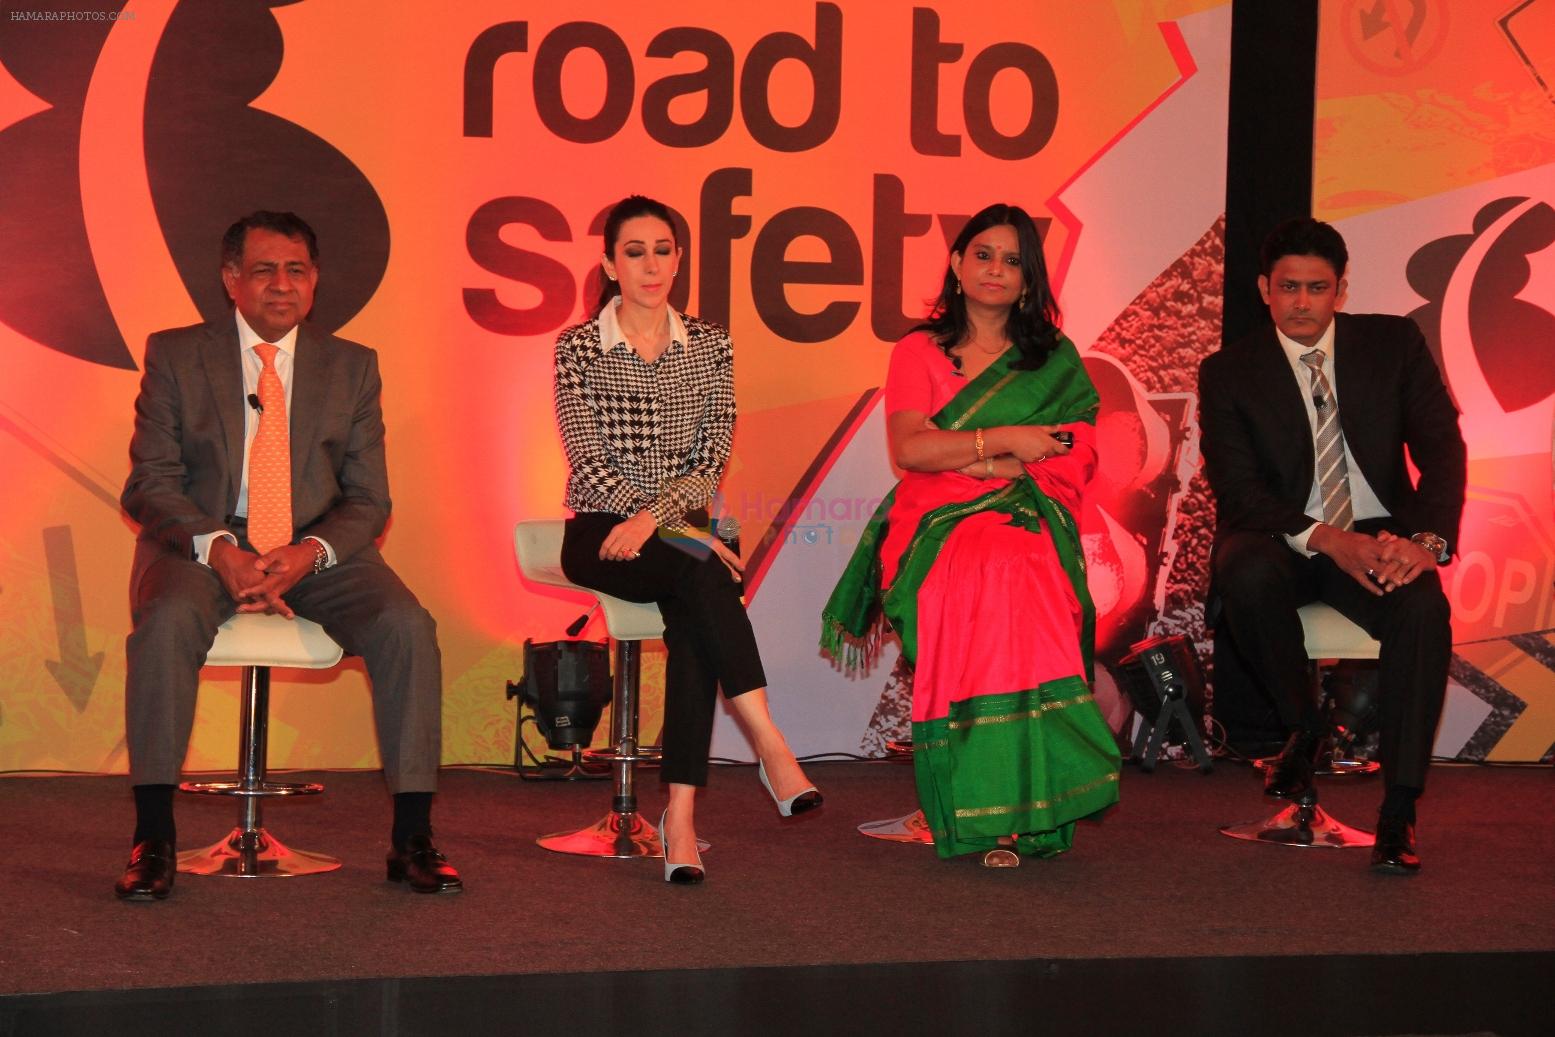 Karisma Kapoor and Anil Kumble promoting NDTV's campaign, Road To Safety on 10th Oct 2014